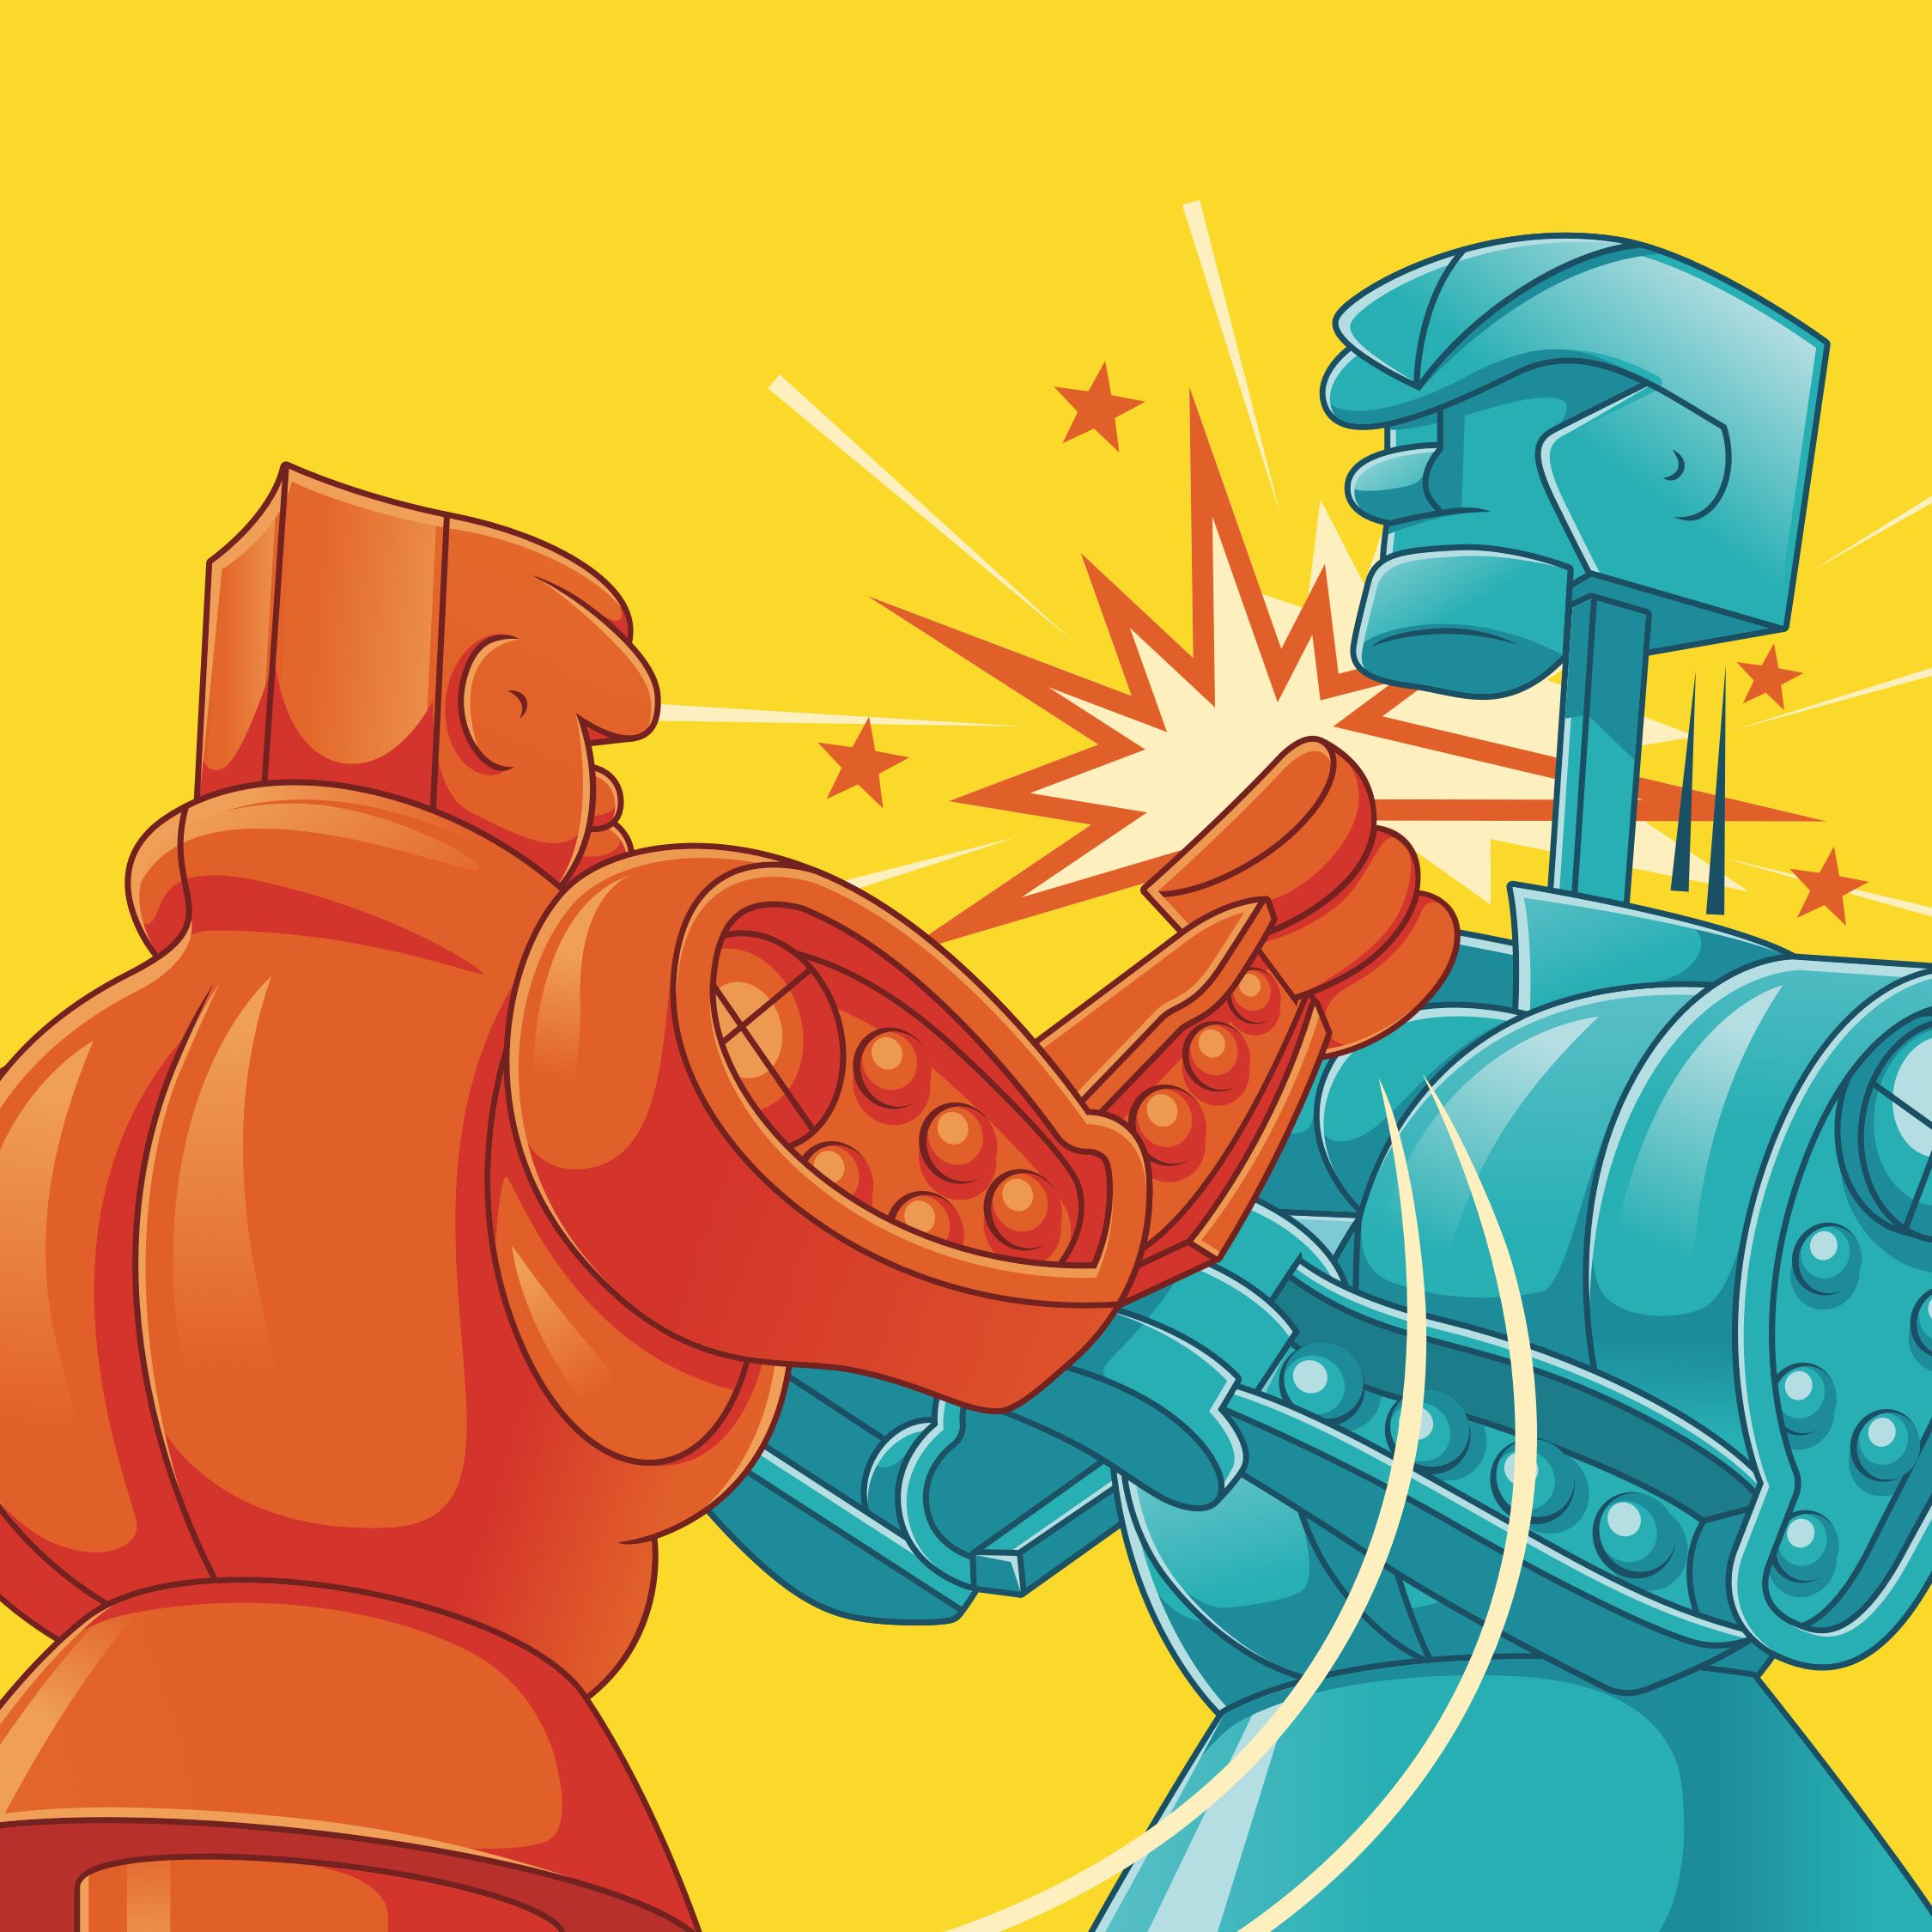 Graphic of two robots fighting